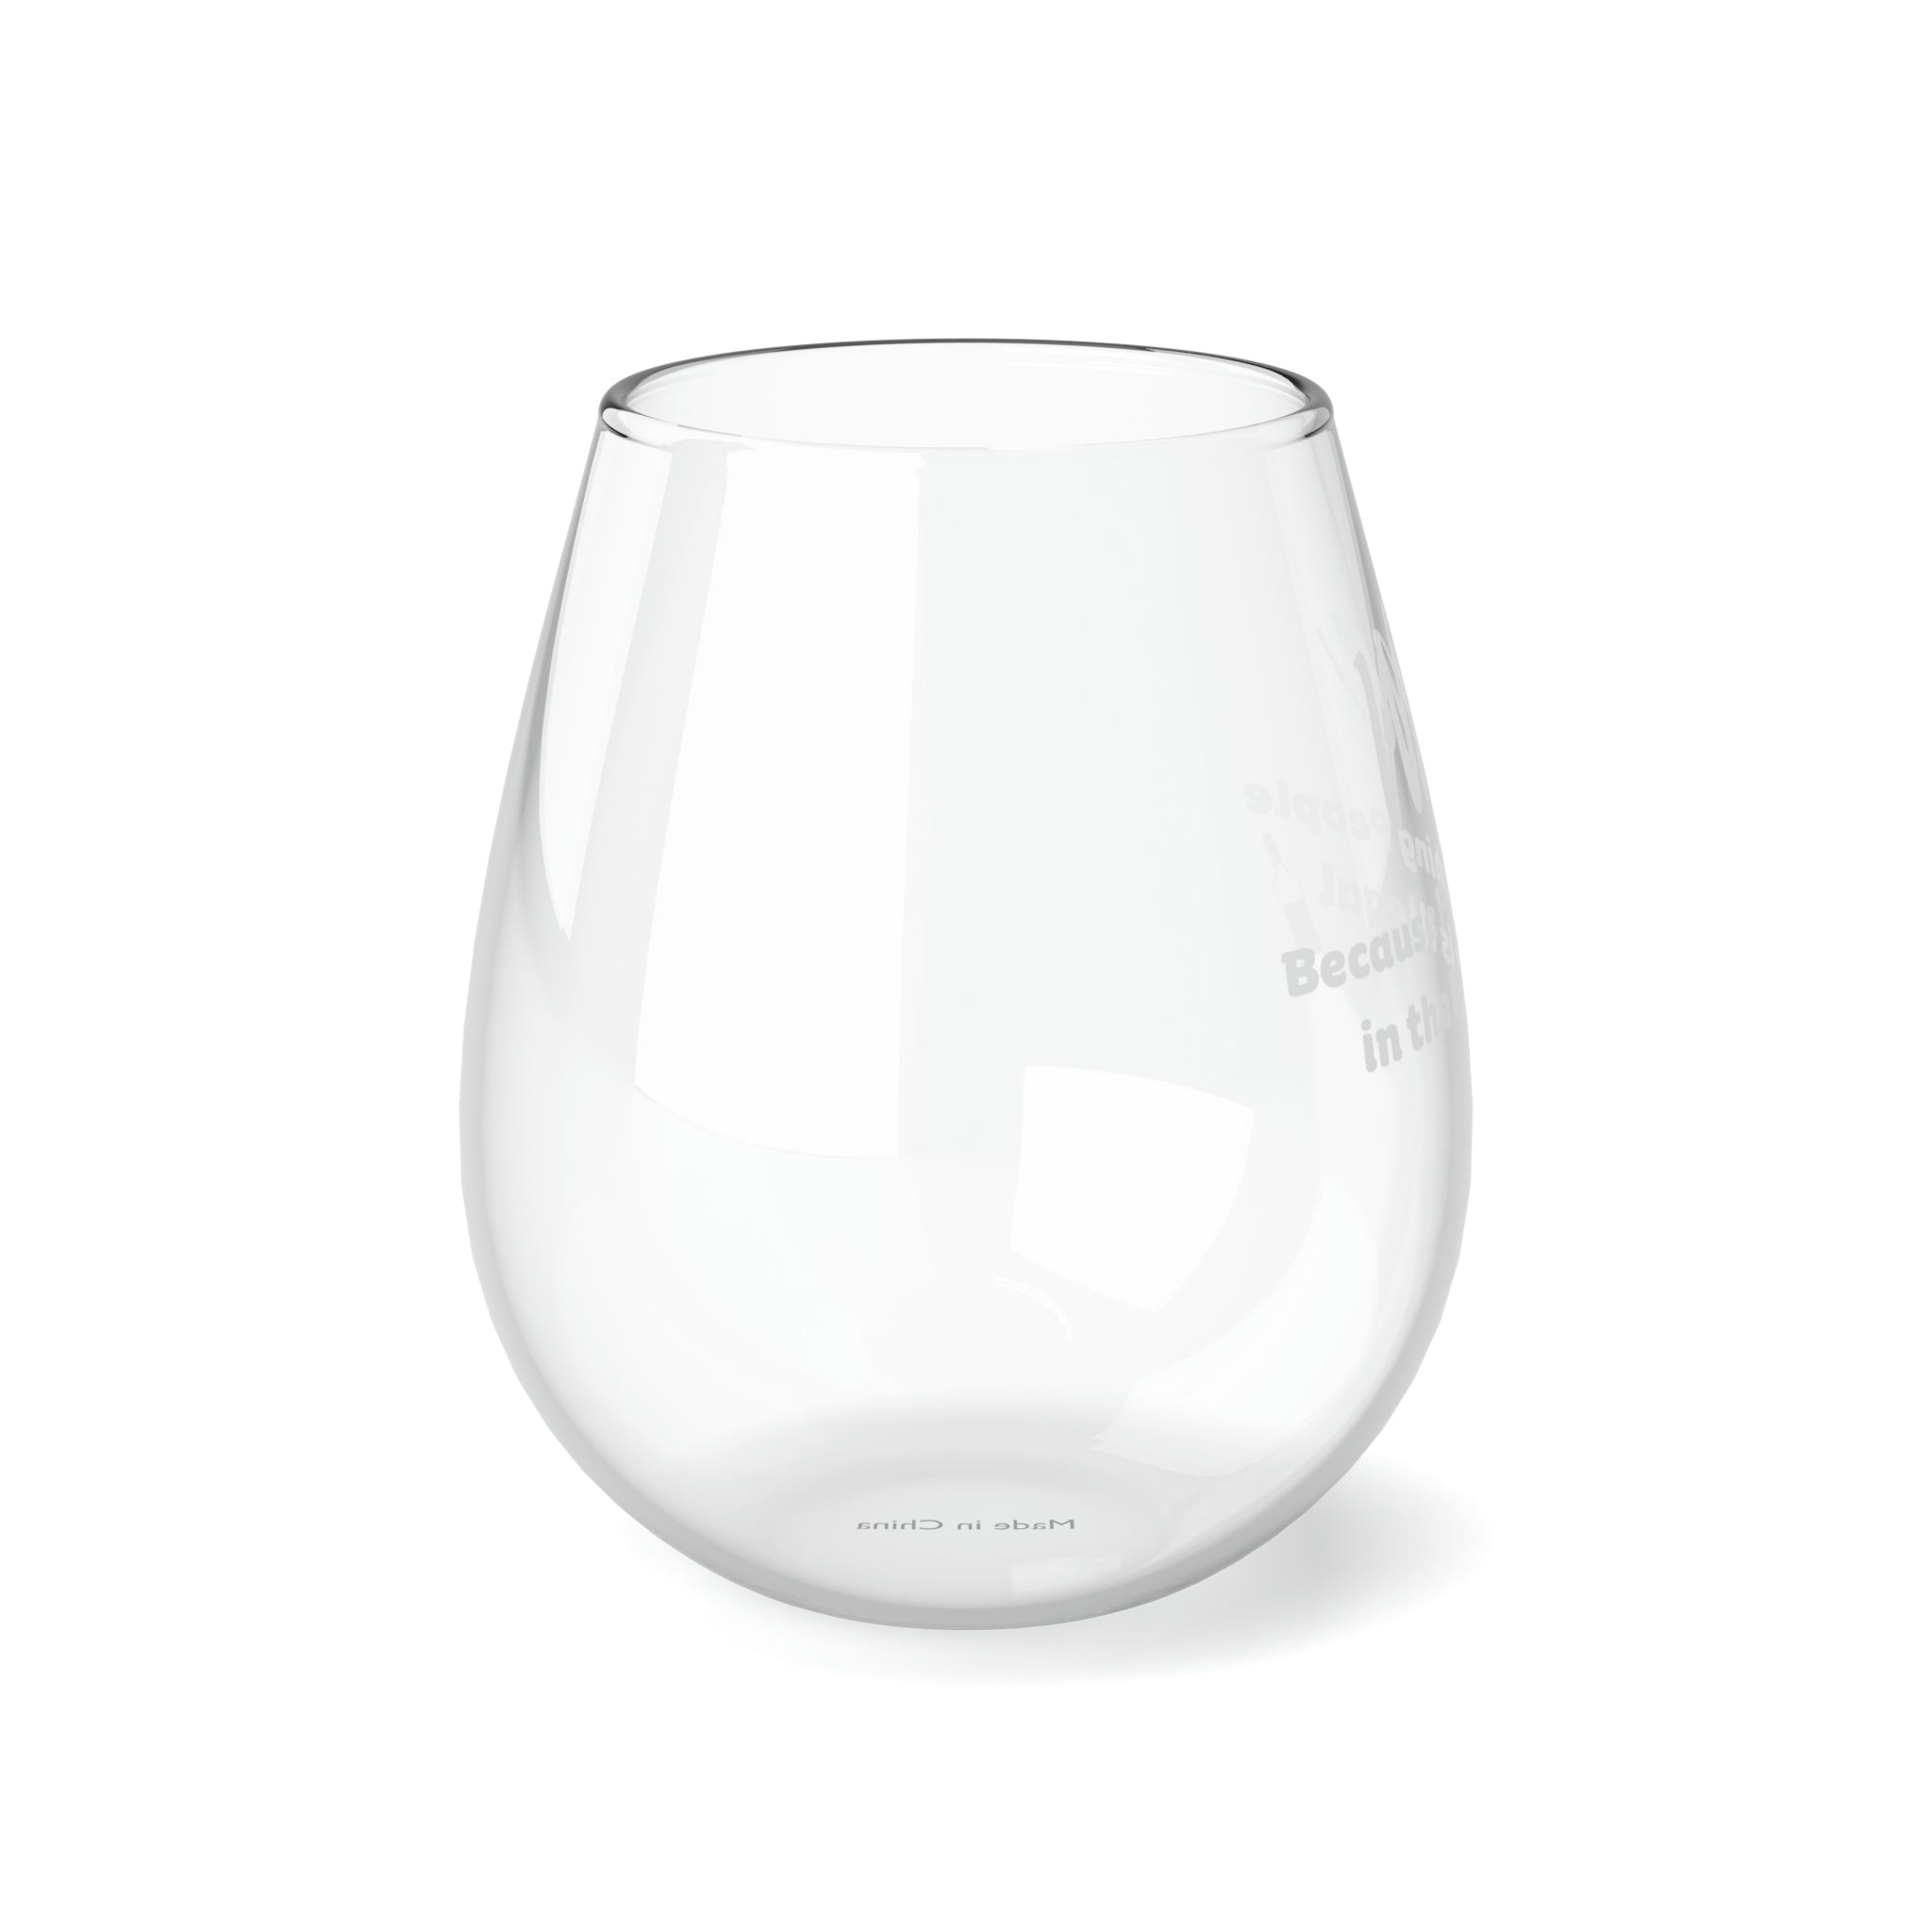 Punching People - Stemless Wine Glass, 11.75oz